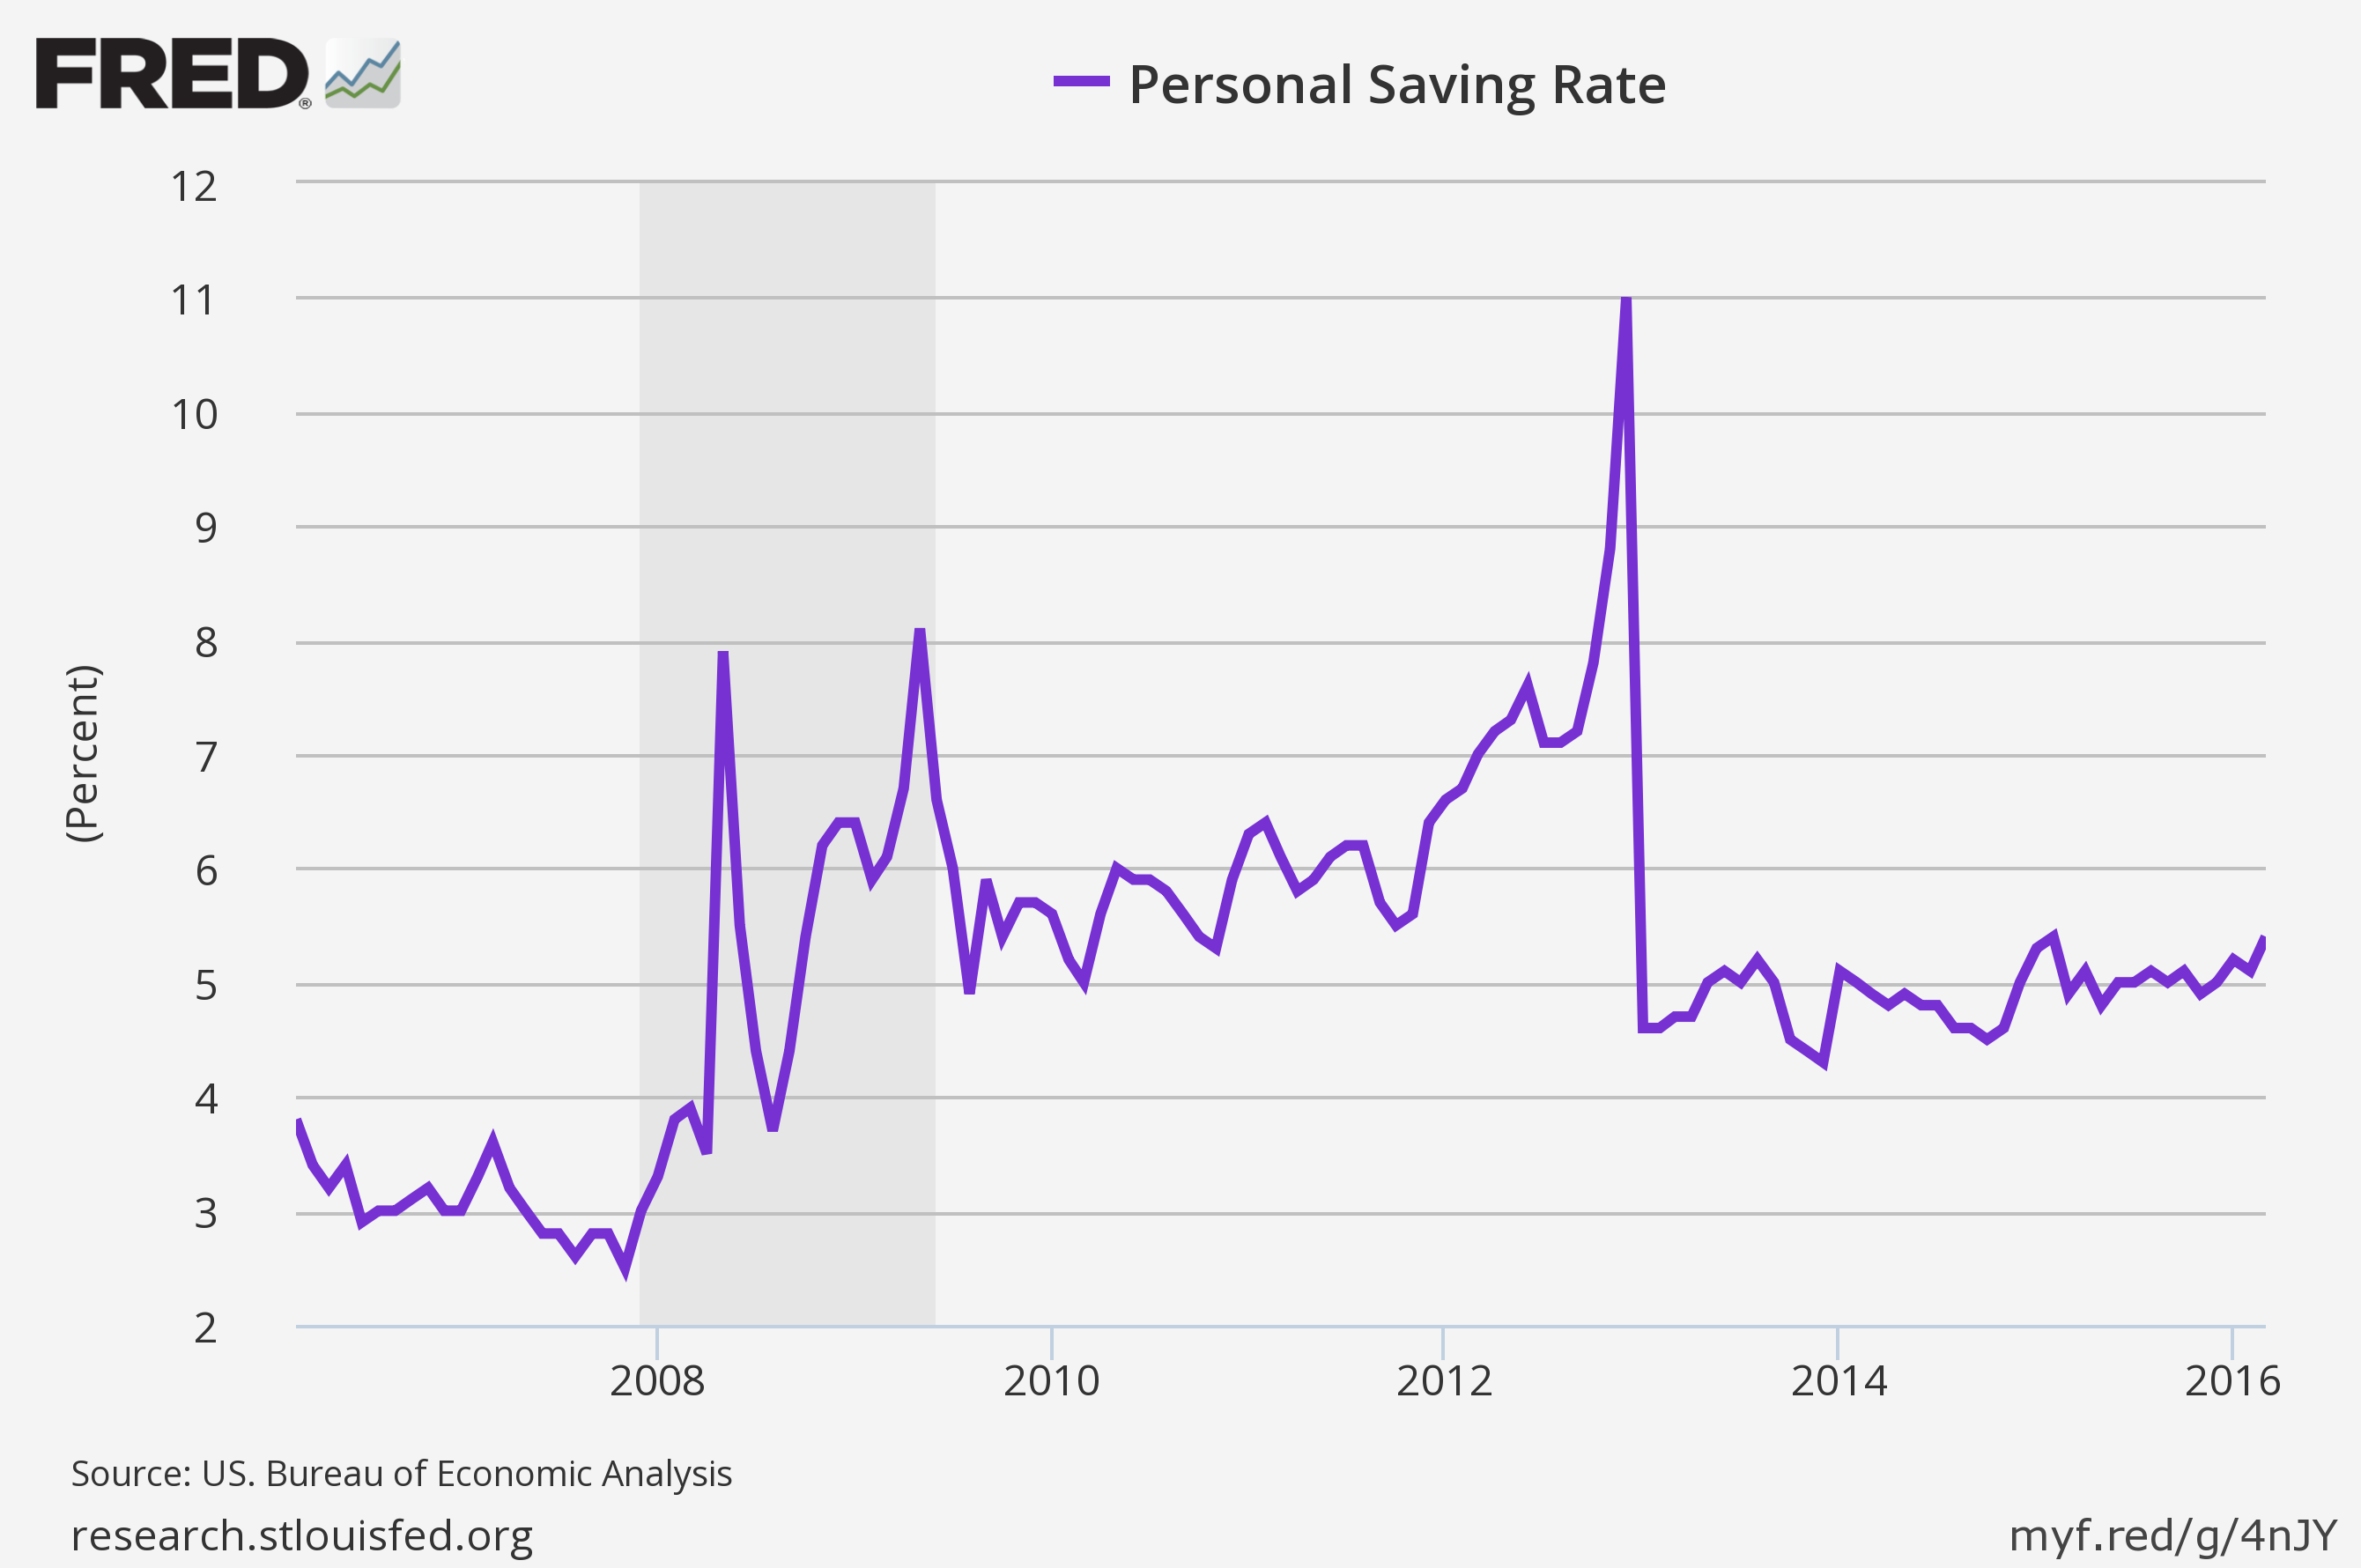 The savings rate steadily marching higher.